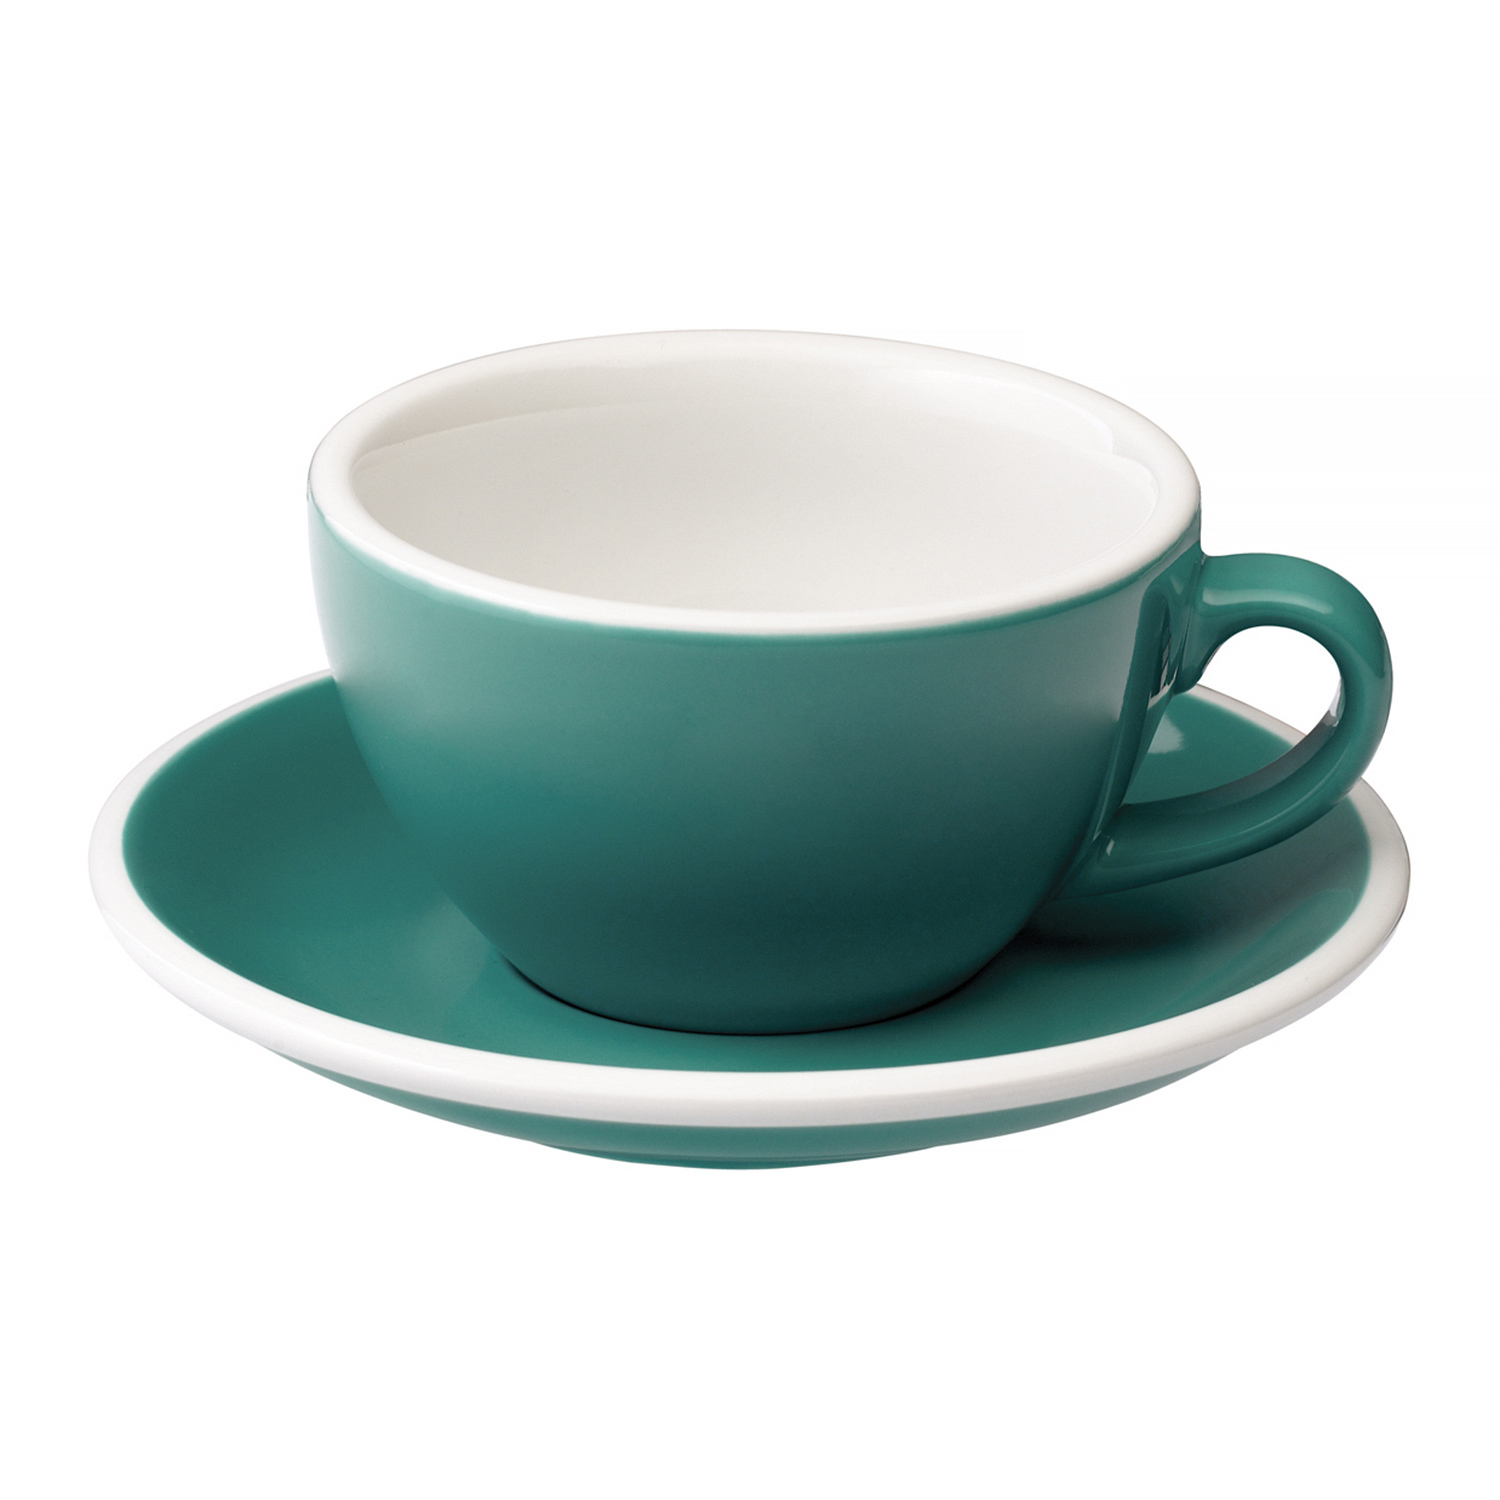 Loveramics Egg - Cappuccino 200 ml Cup and Saucer  - Teal